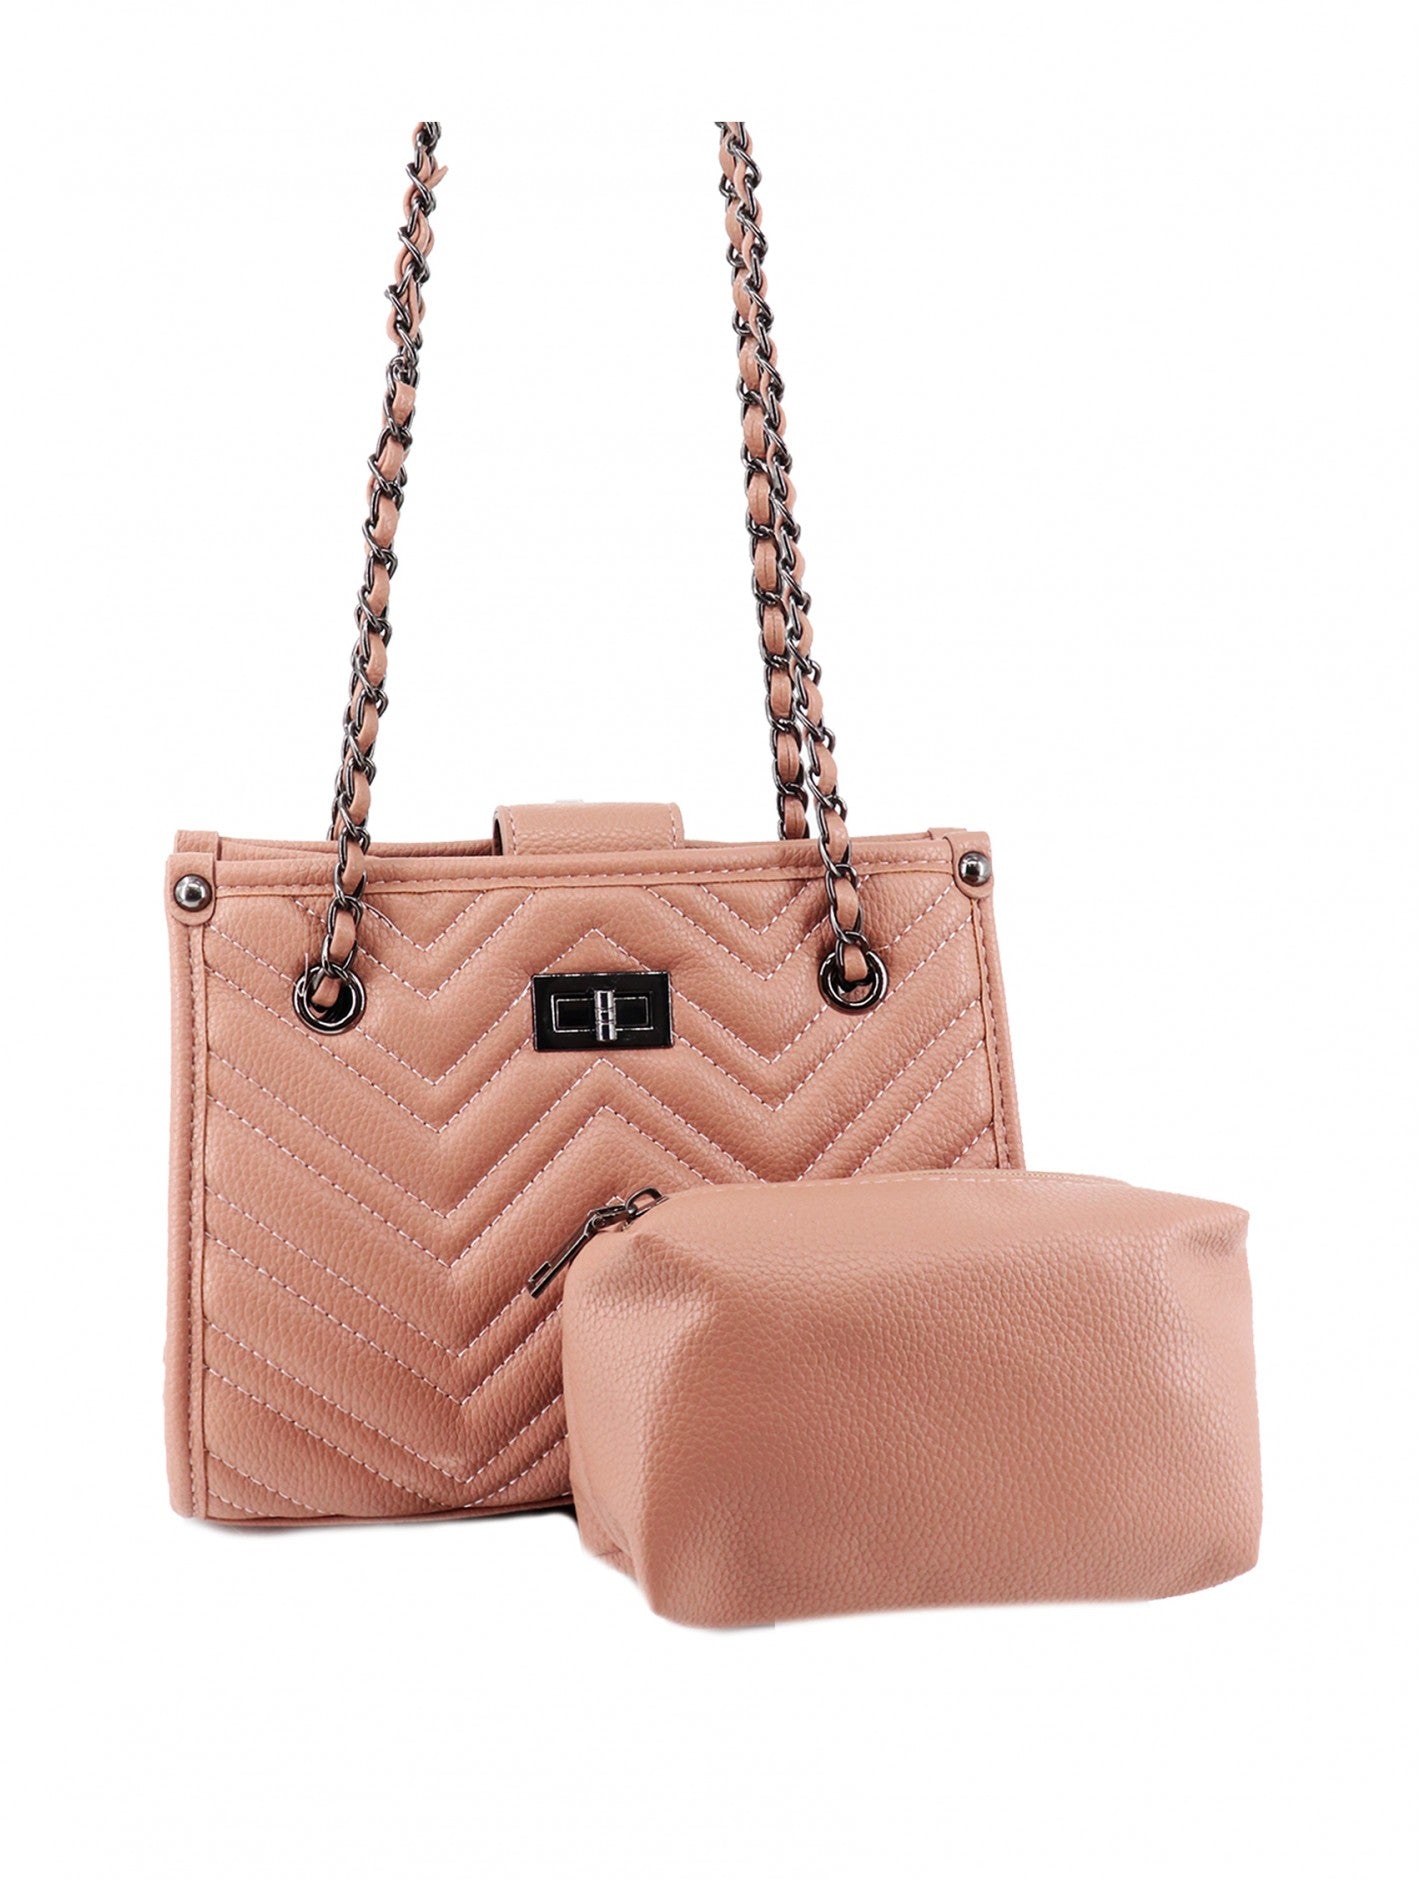 Pink Satchel Bag with Small Pouch